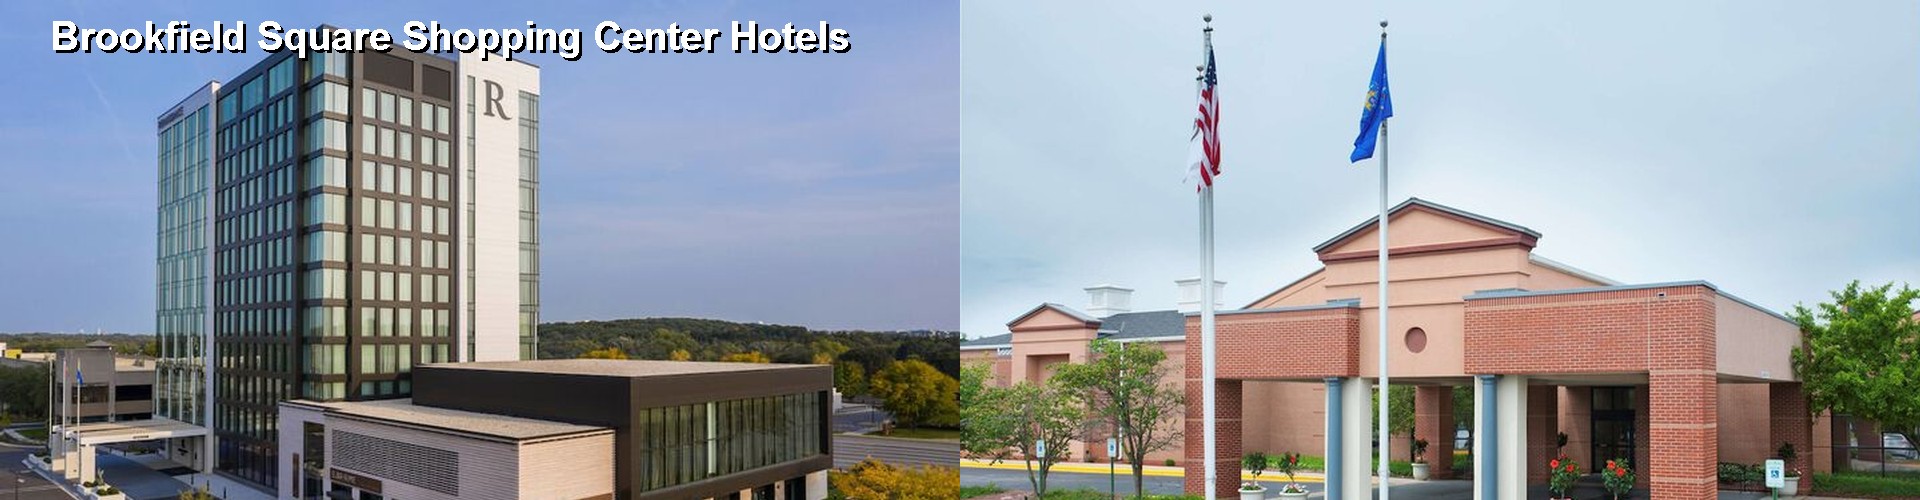 5 Best Hotels near Brookfield Square Shopping Center